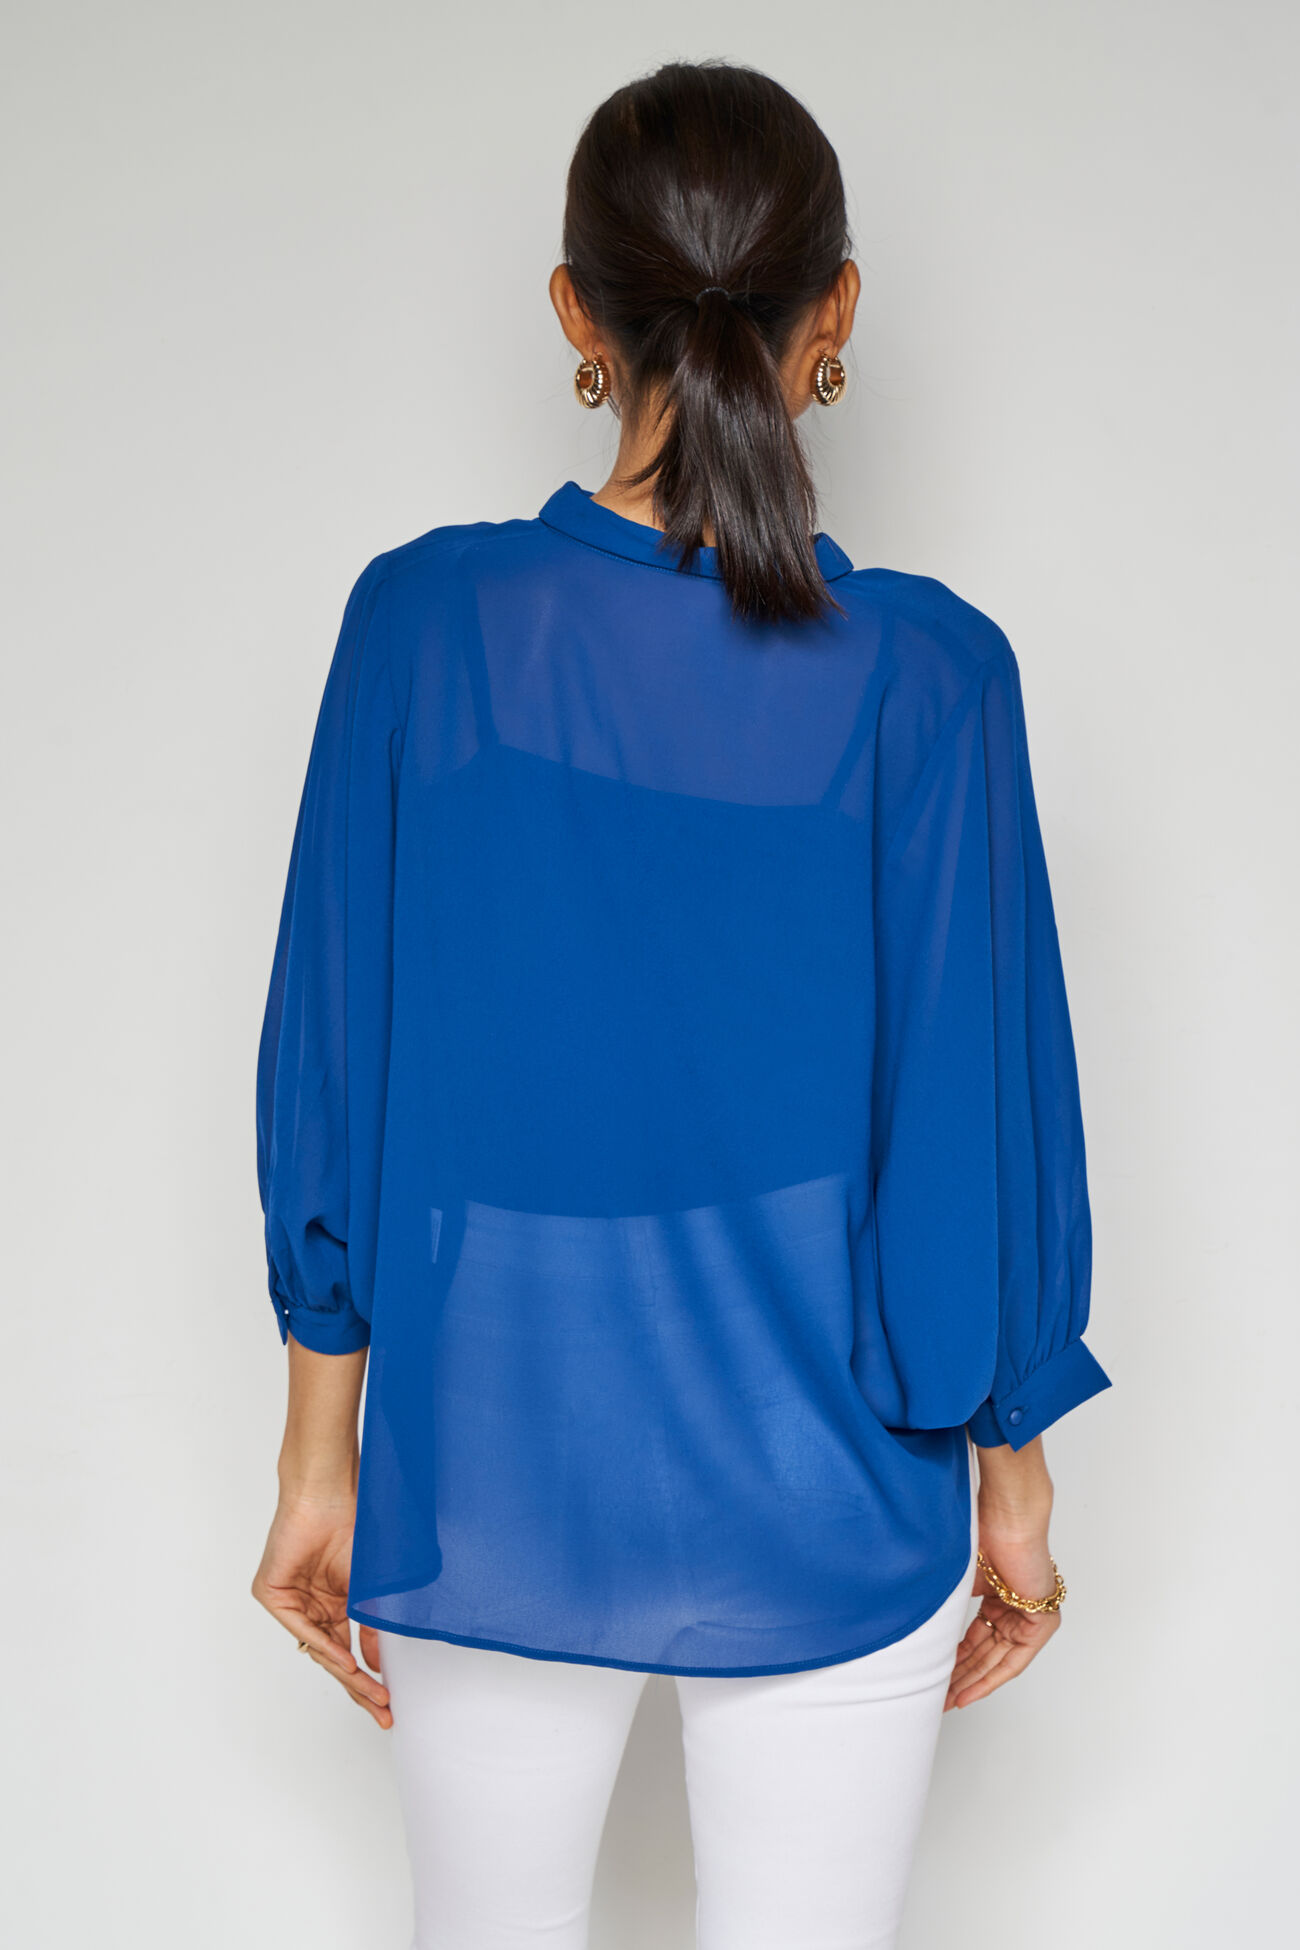 Sheer Bliss Top, Blue, image 4